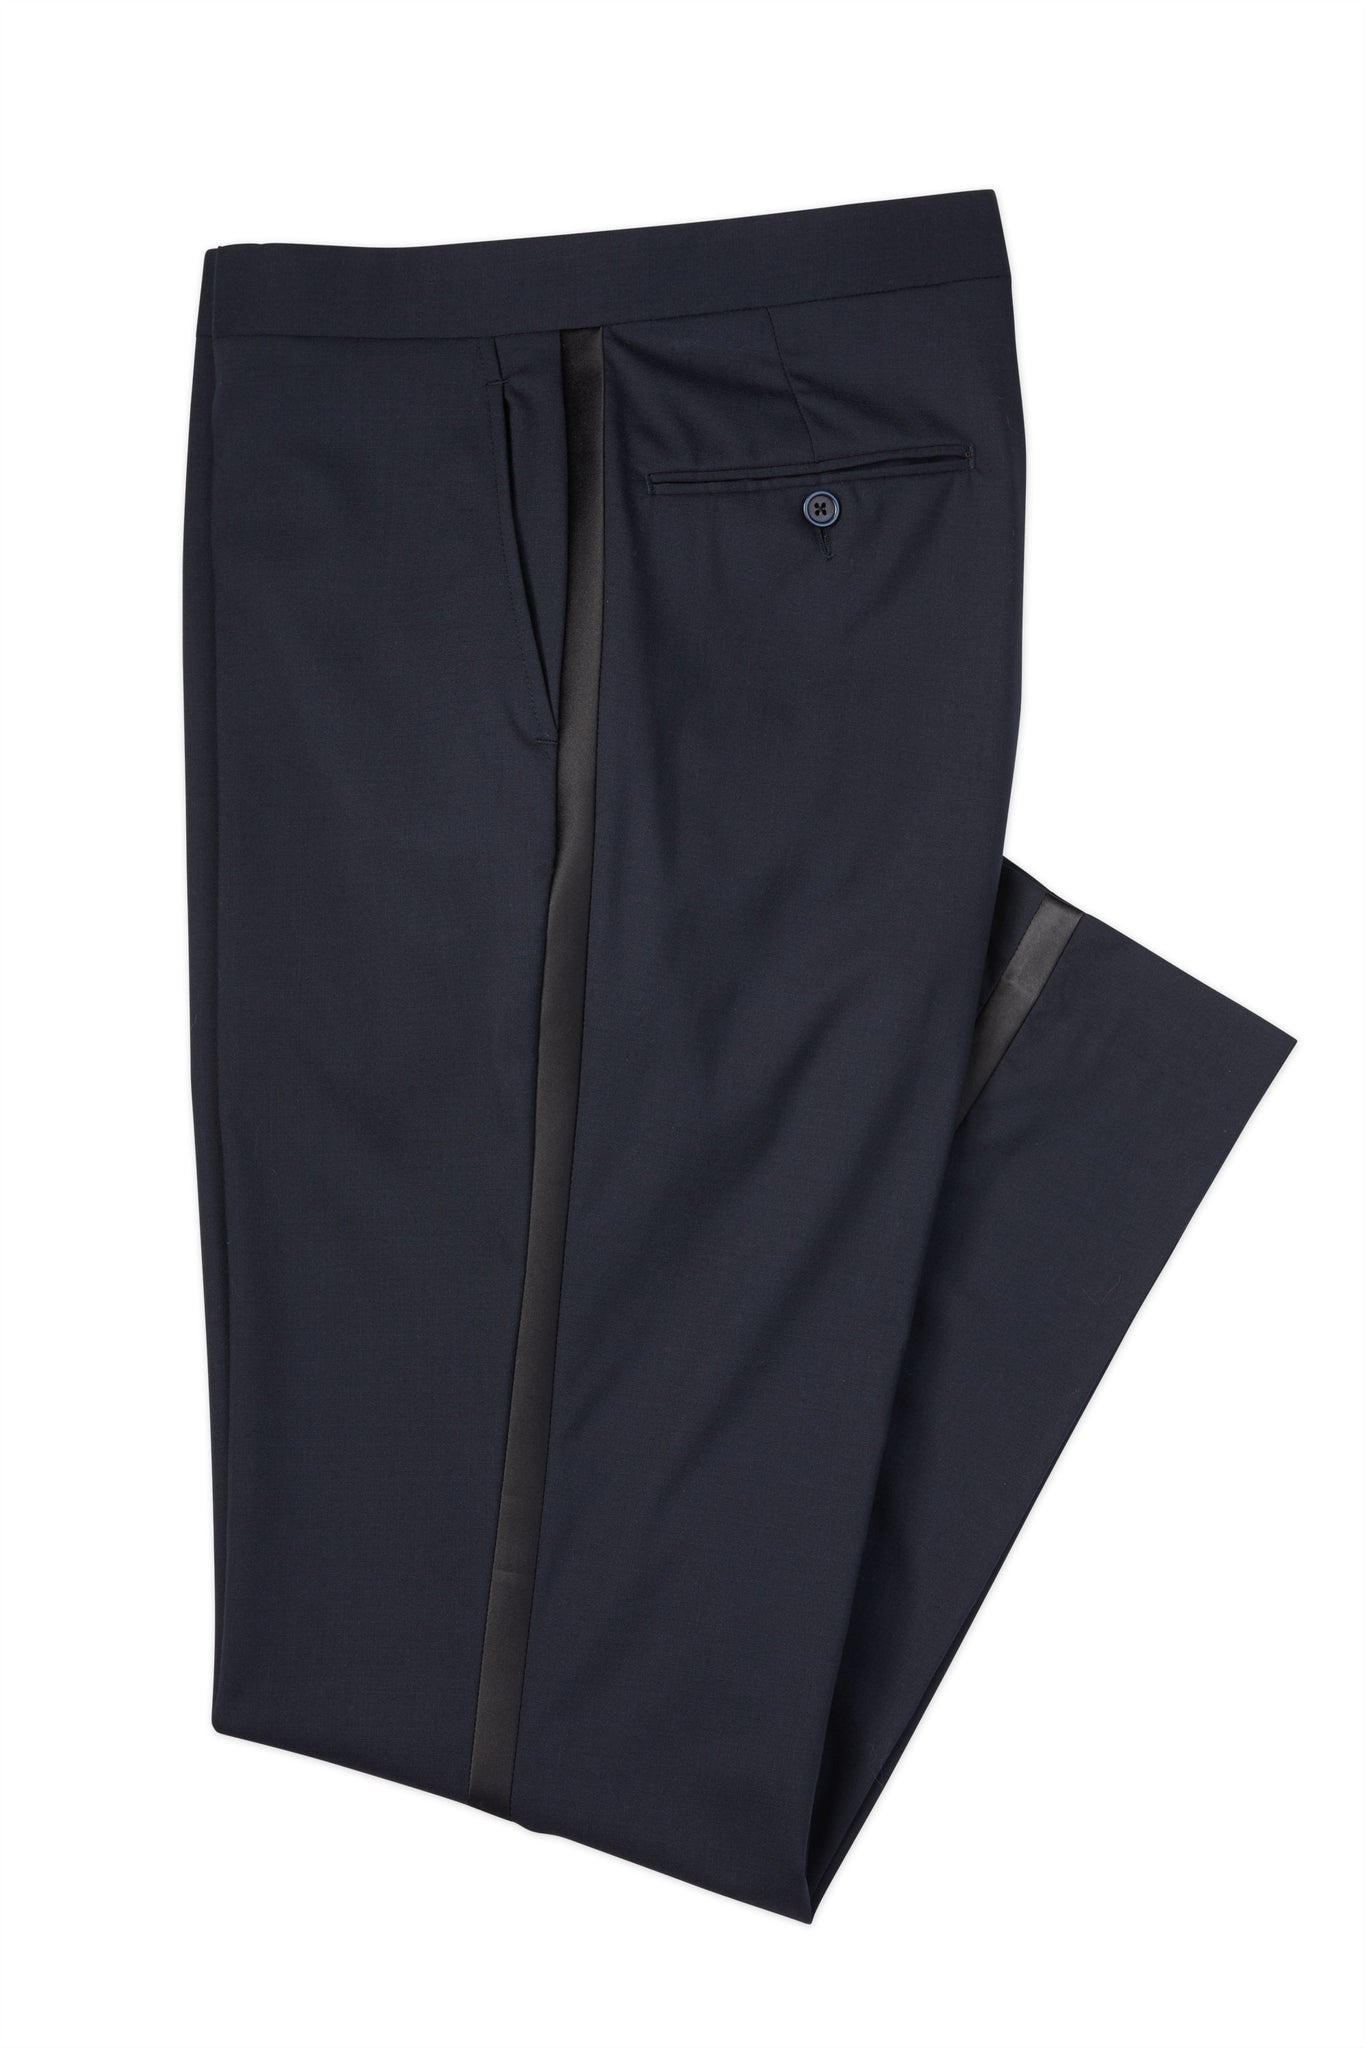 Modern Fit Navy Super 110's Worsted Wool Performance Tuxedo Pant -  Hardwick.com